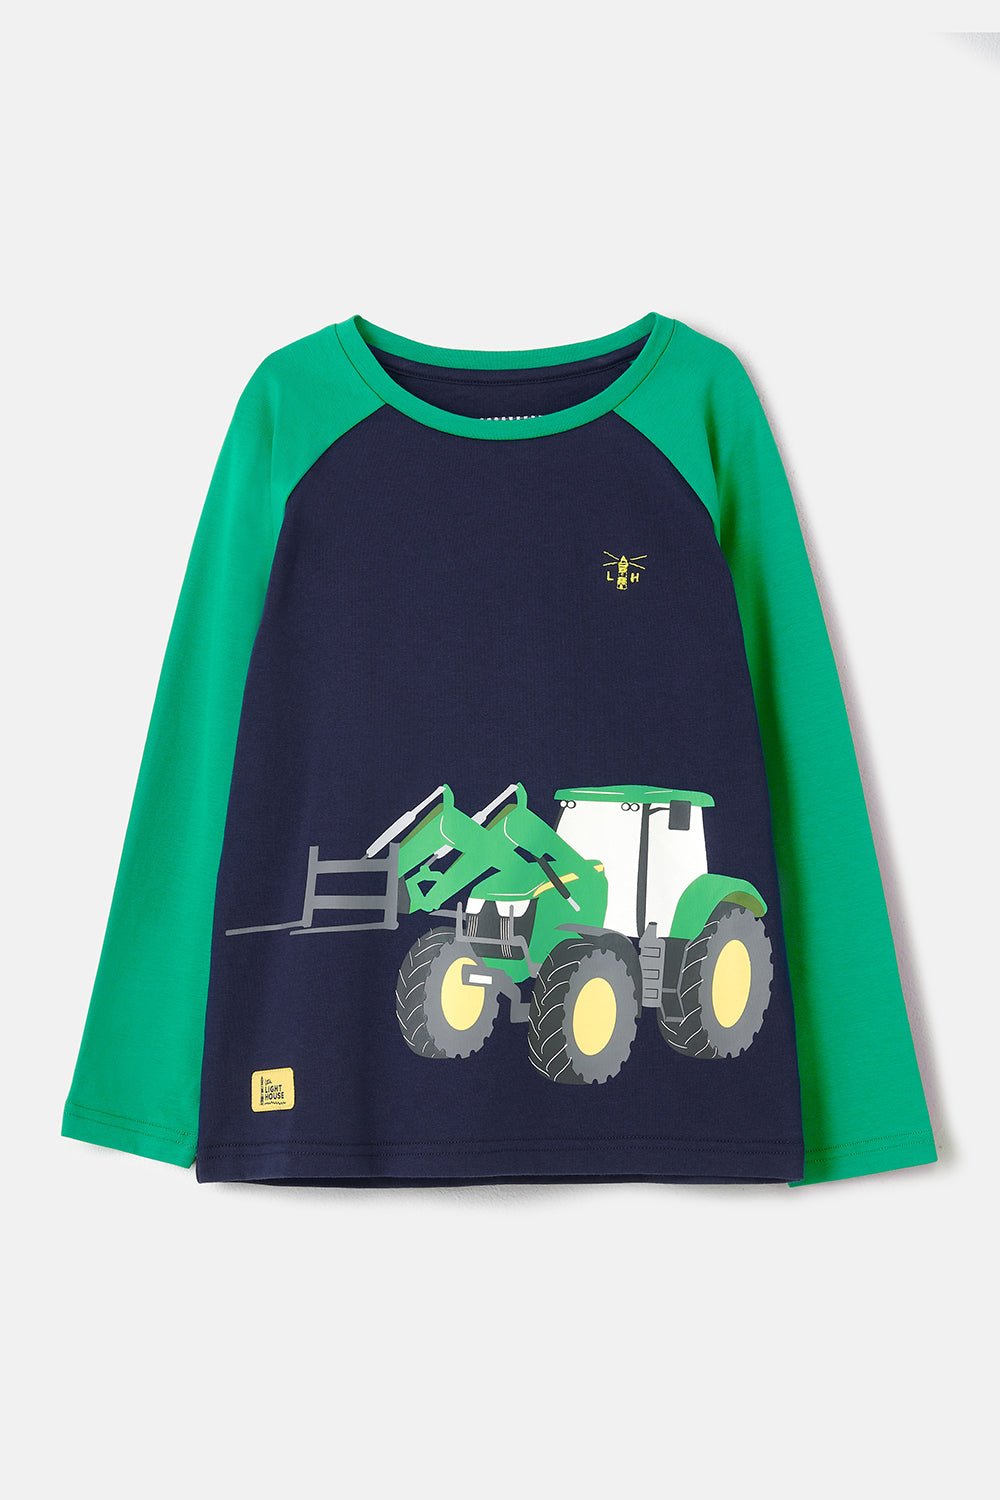 Mason Top - Green Front Loader-Lighthouse